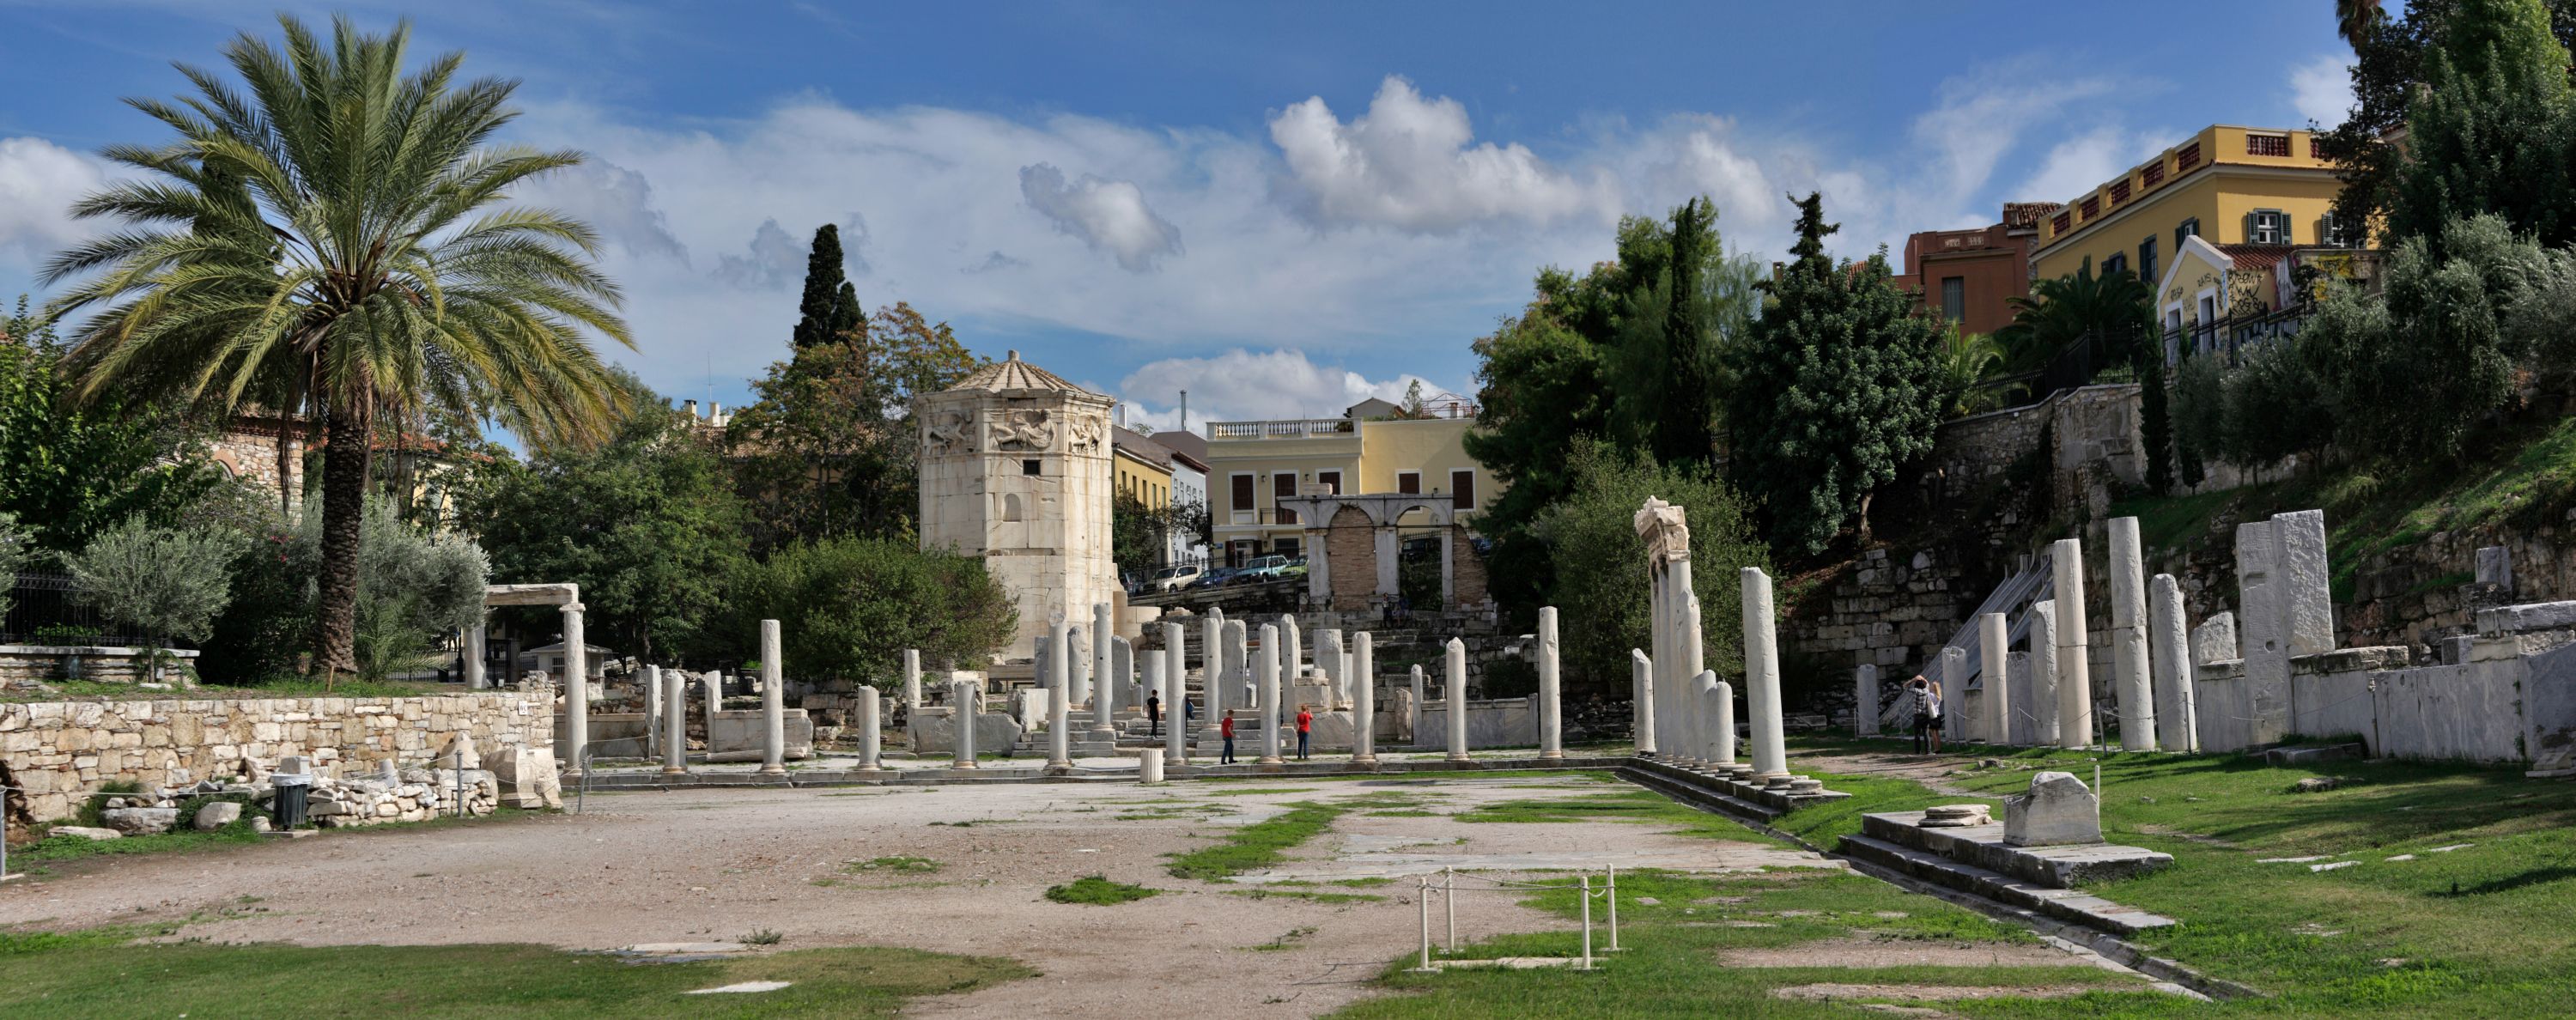 The Roman Agora of Athens and the famous "Tower of the Winds" (photo by Andreas Trepte)